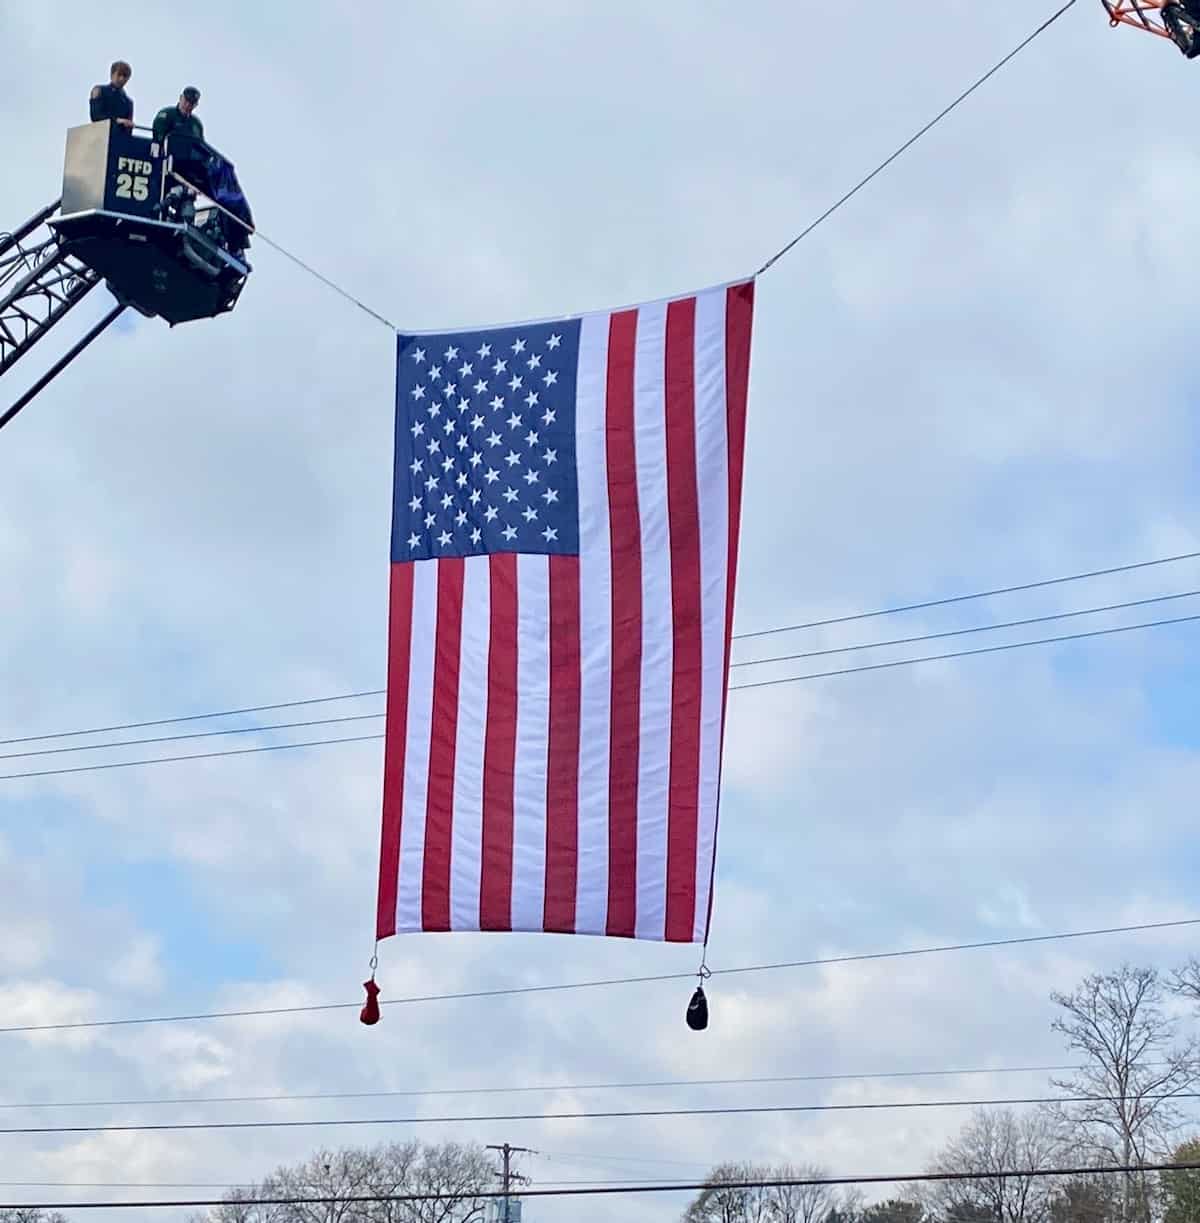 American flag flying high triggers the grief of a teenager.